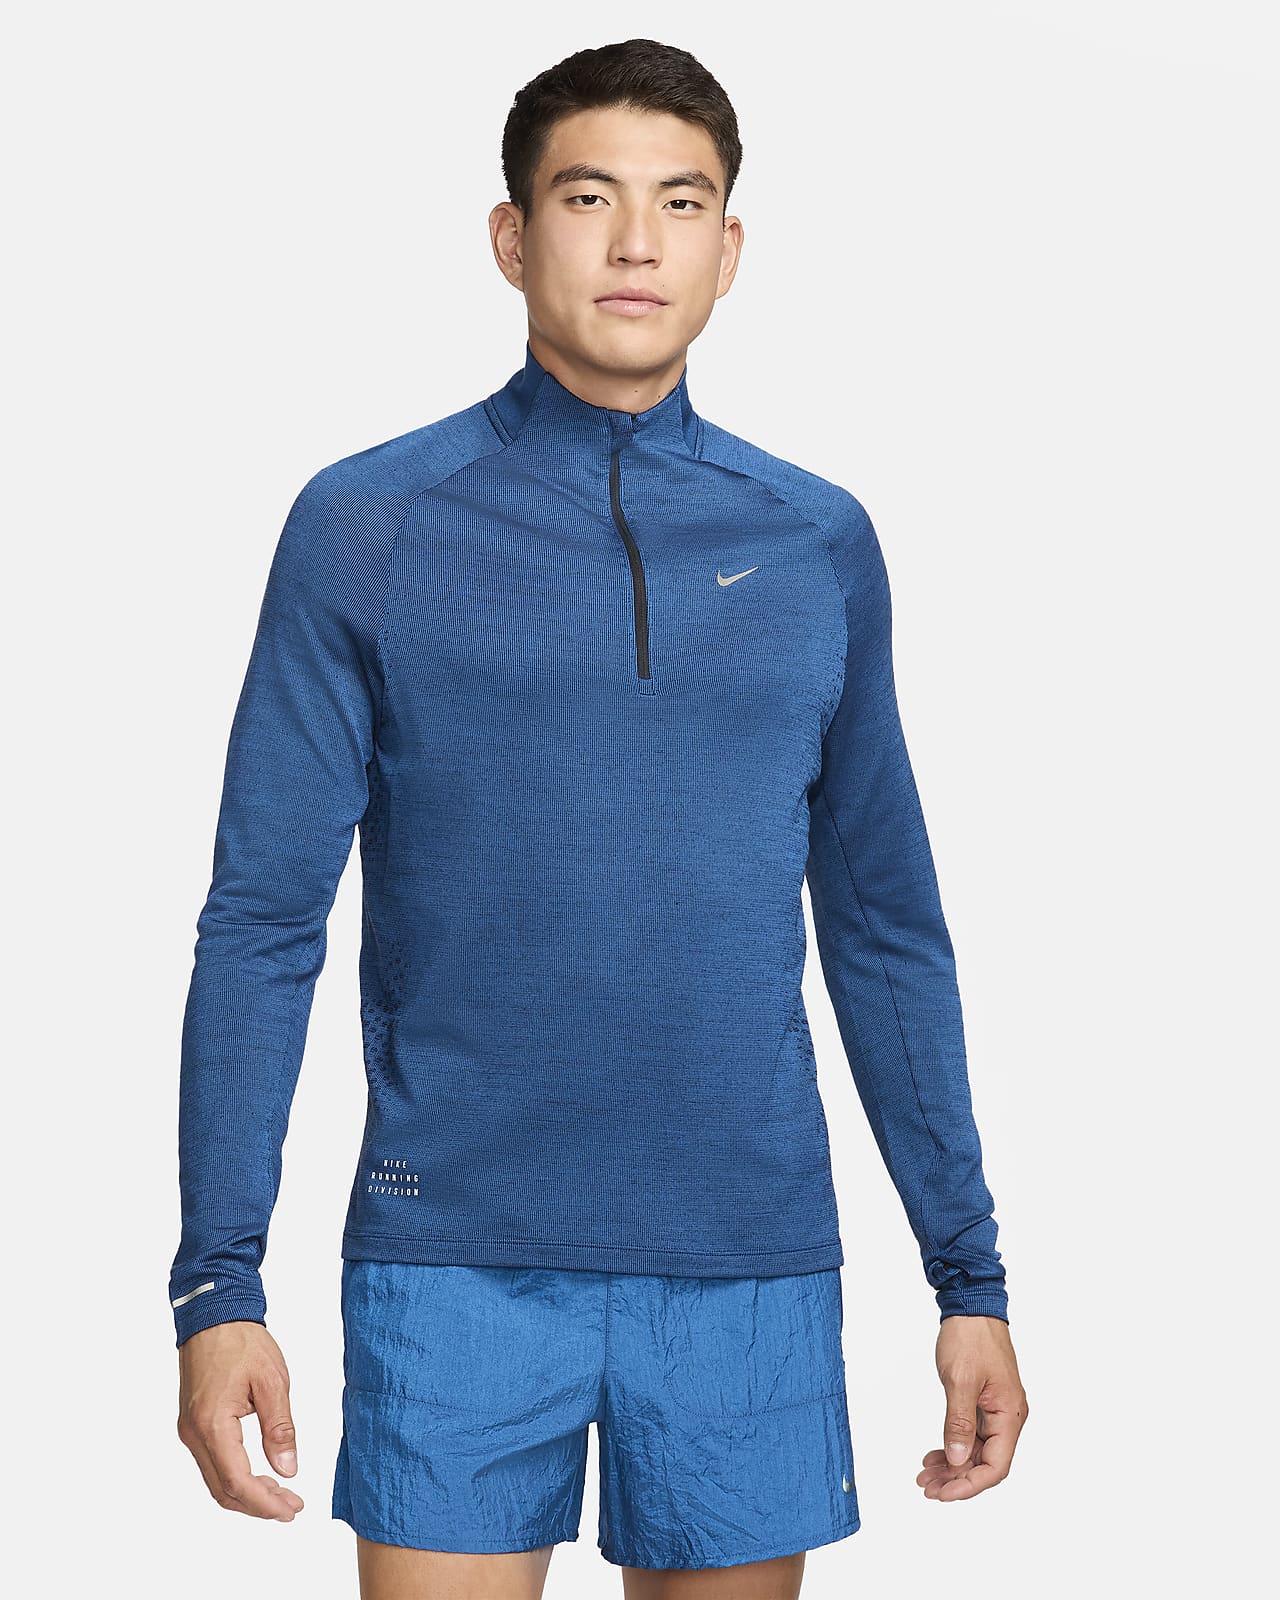 Haut de running Therma-FIT ADV Nike Running Division pour homme